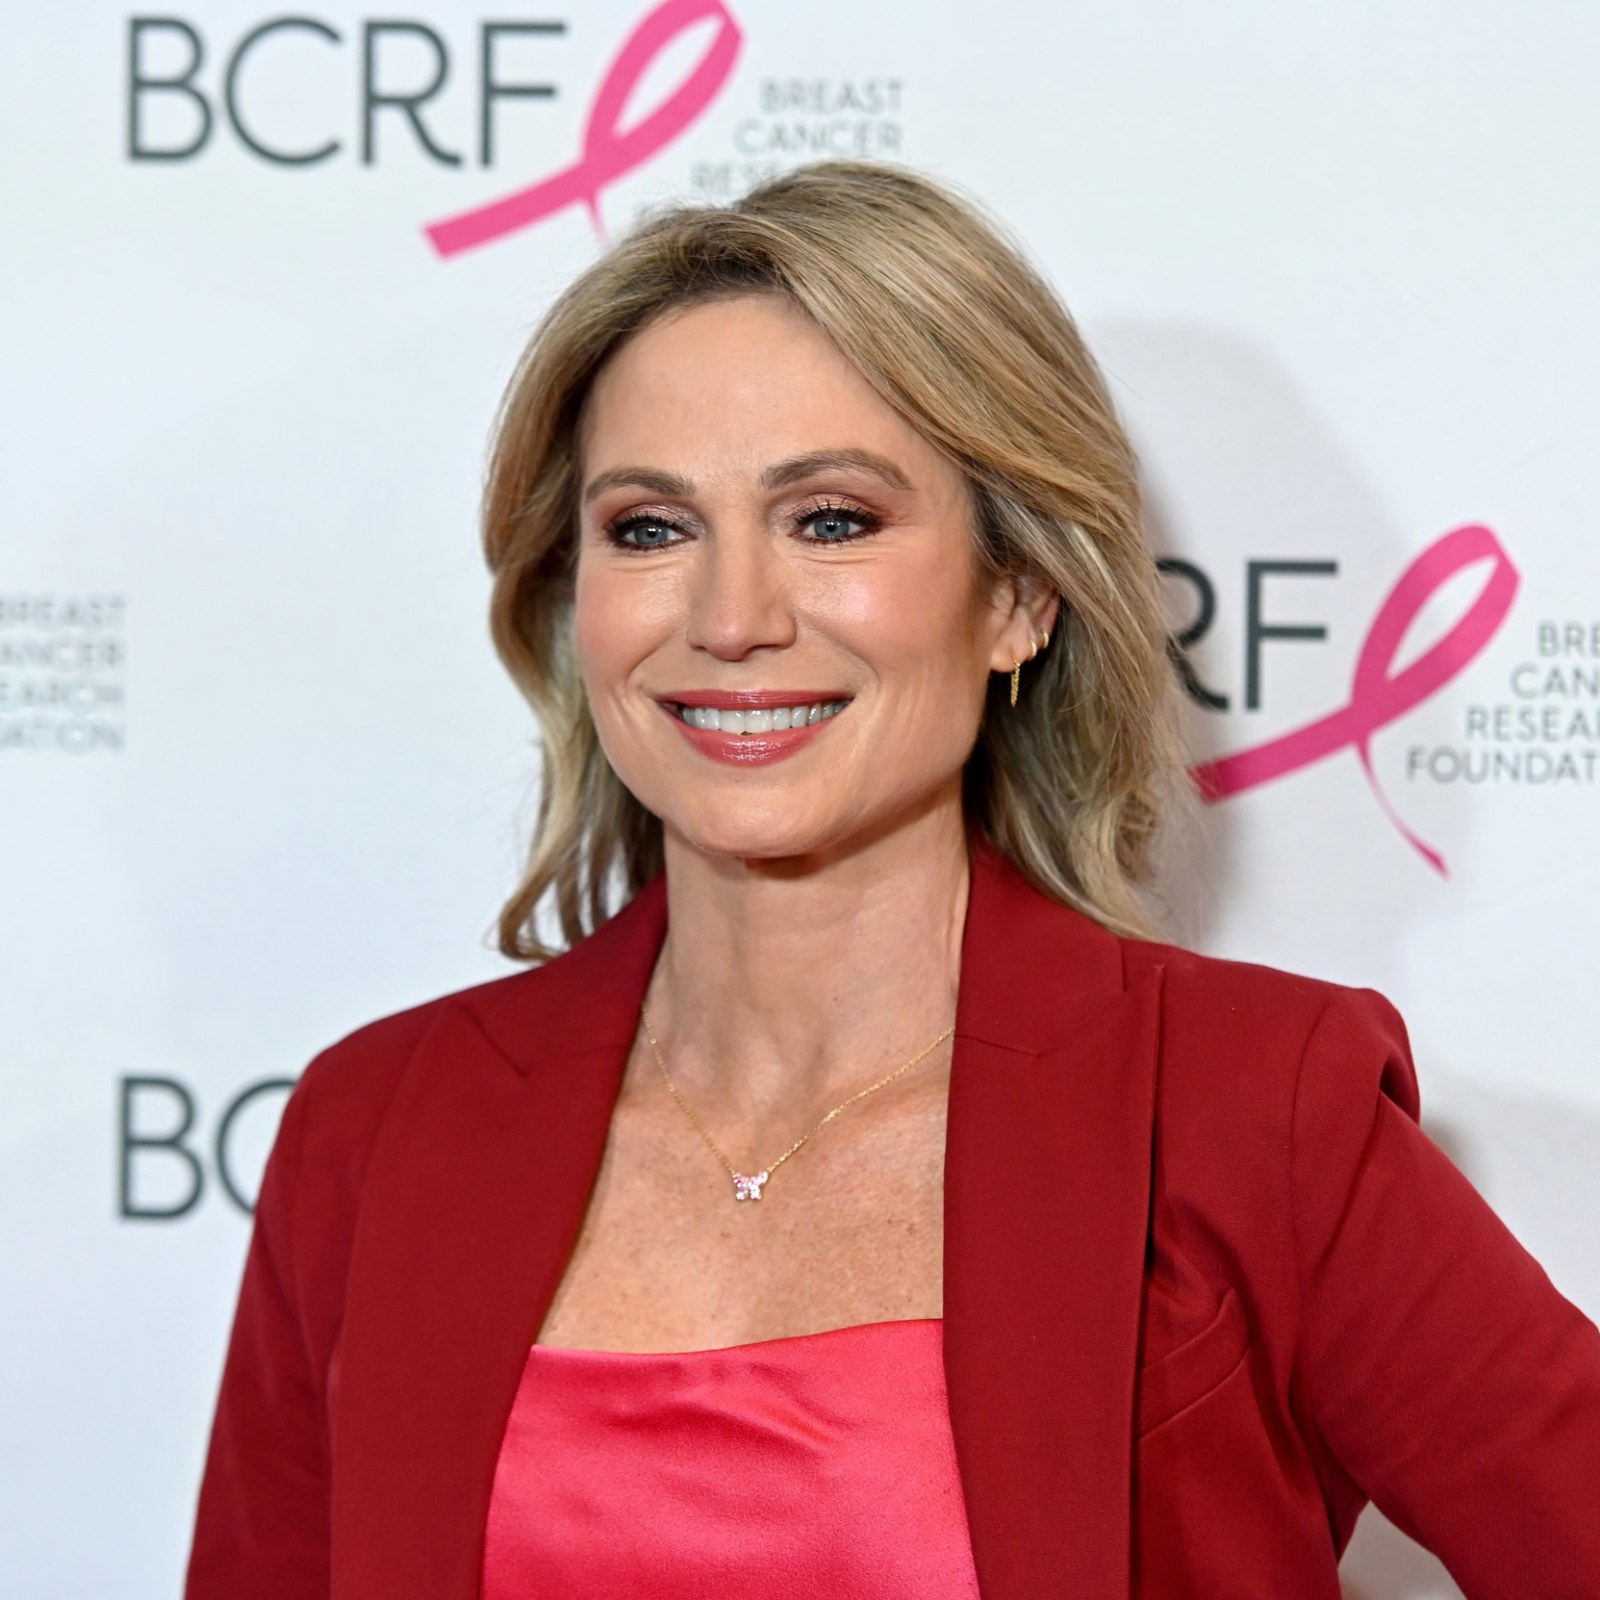 Amy Robach: Her Parents, Net Worth, And Relationship Explored